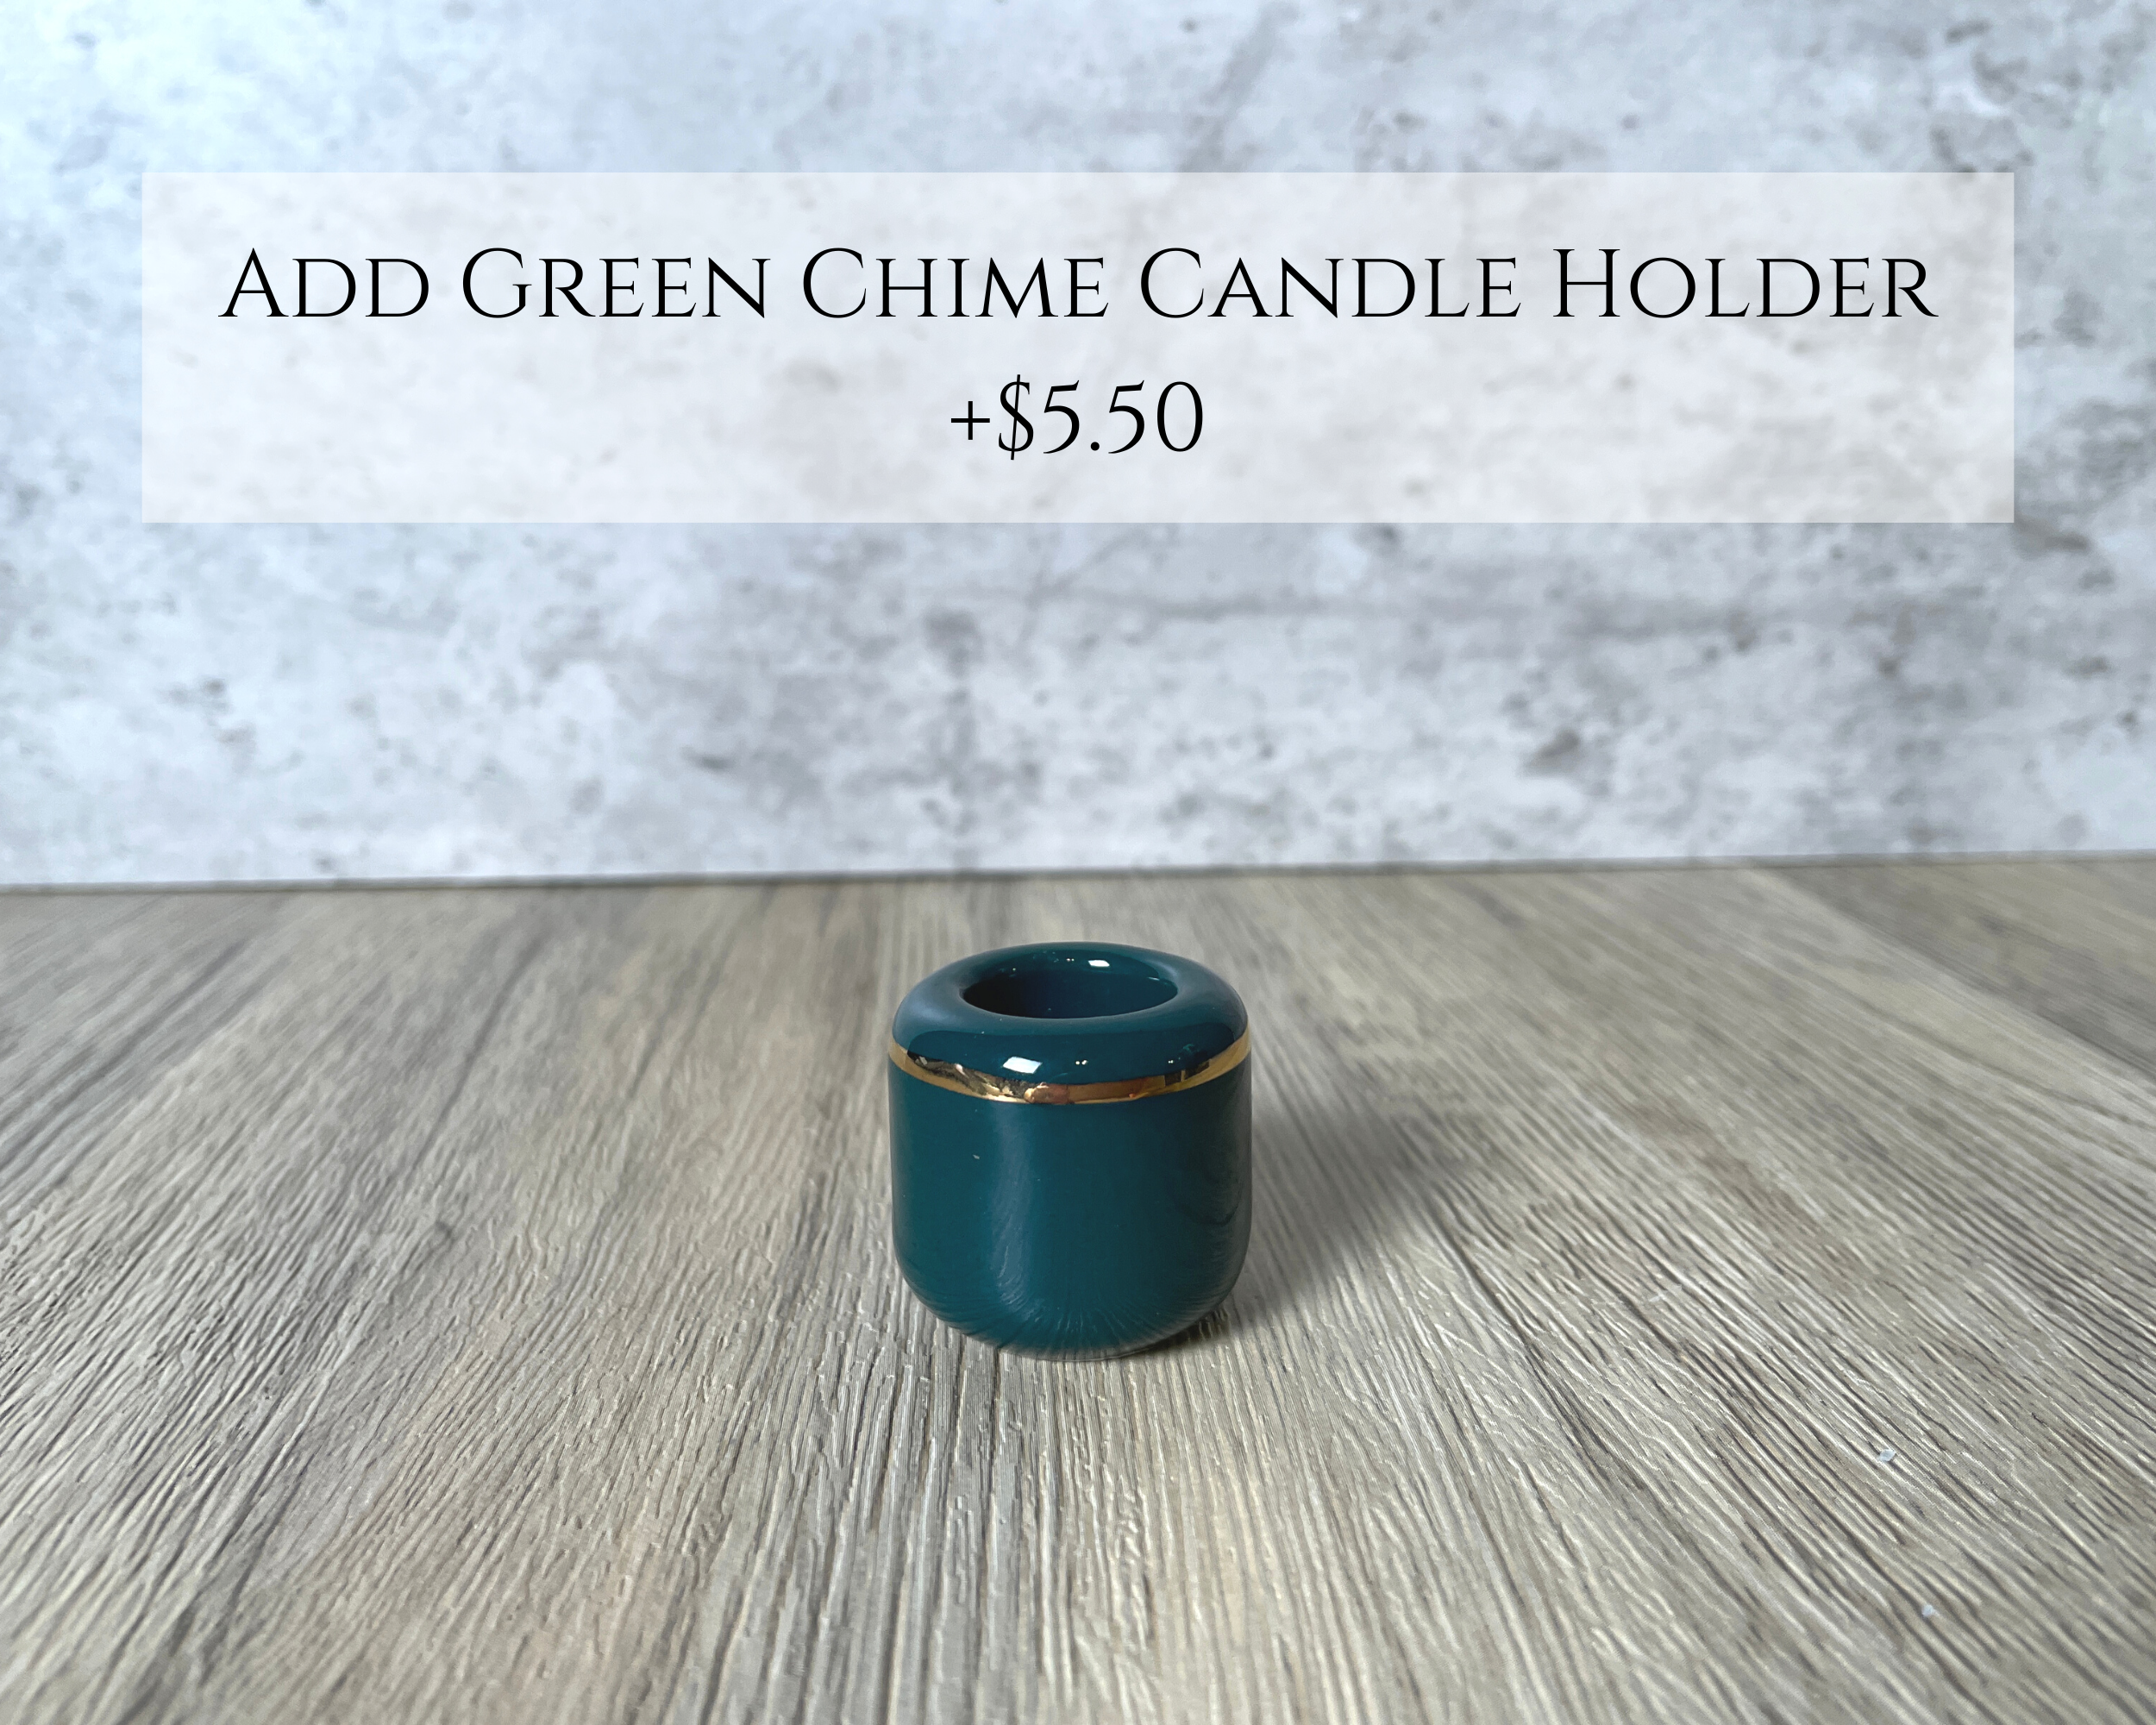 Buy Online Latest and Unique Green Chime Candles 4" Inch - Abundance, Wealth, Prosperity, Luck | Shop Best Spiritual Items - The Mystical Ritual